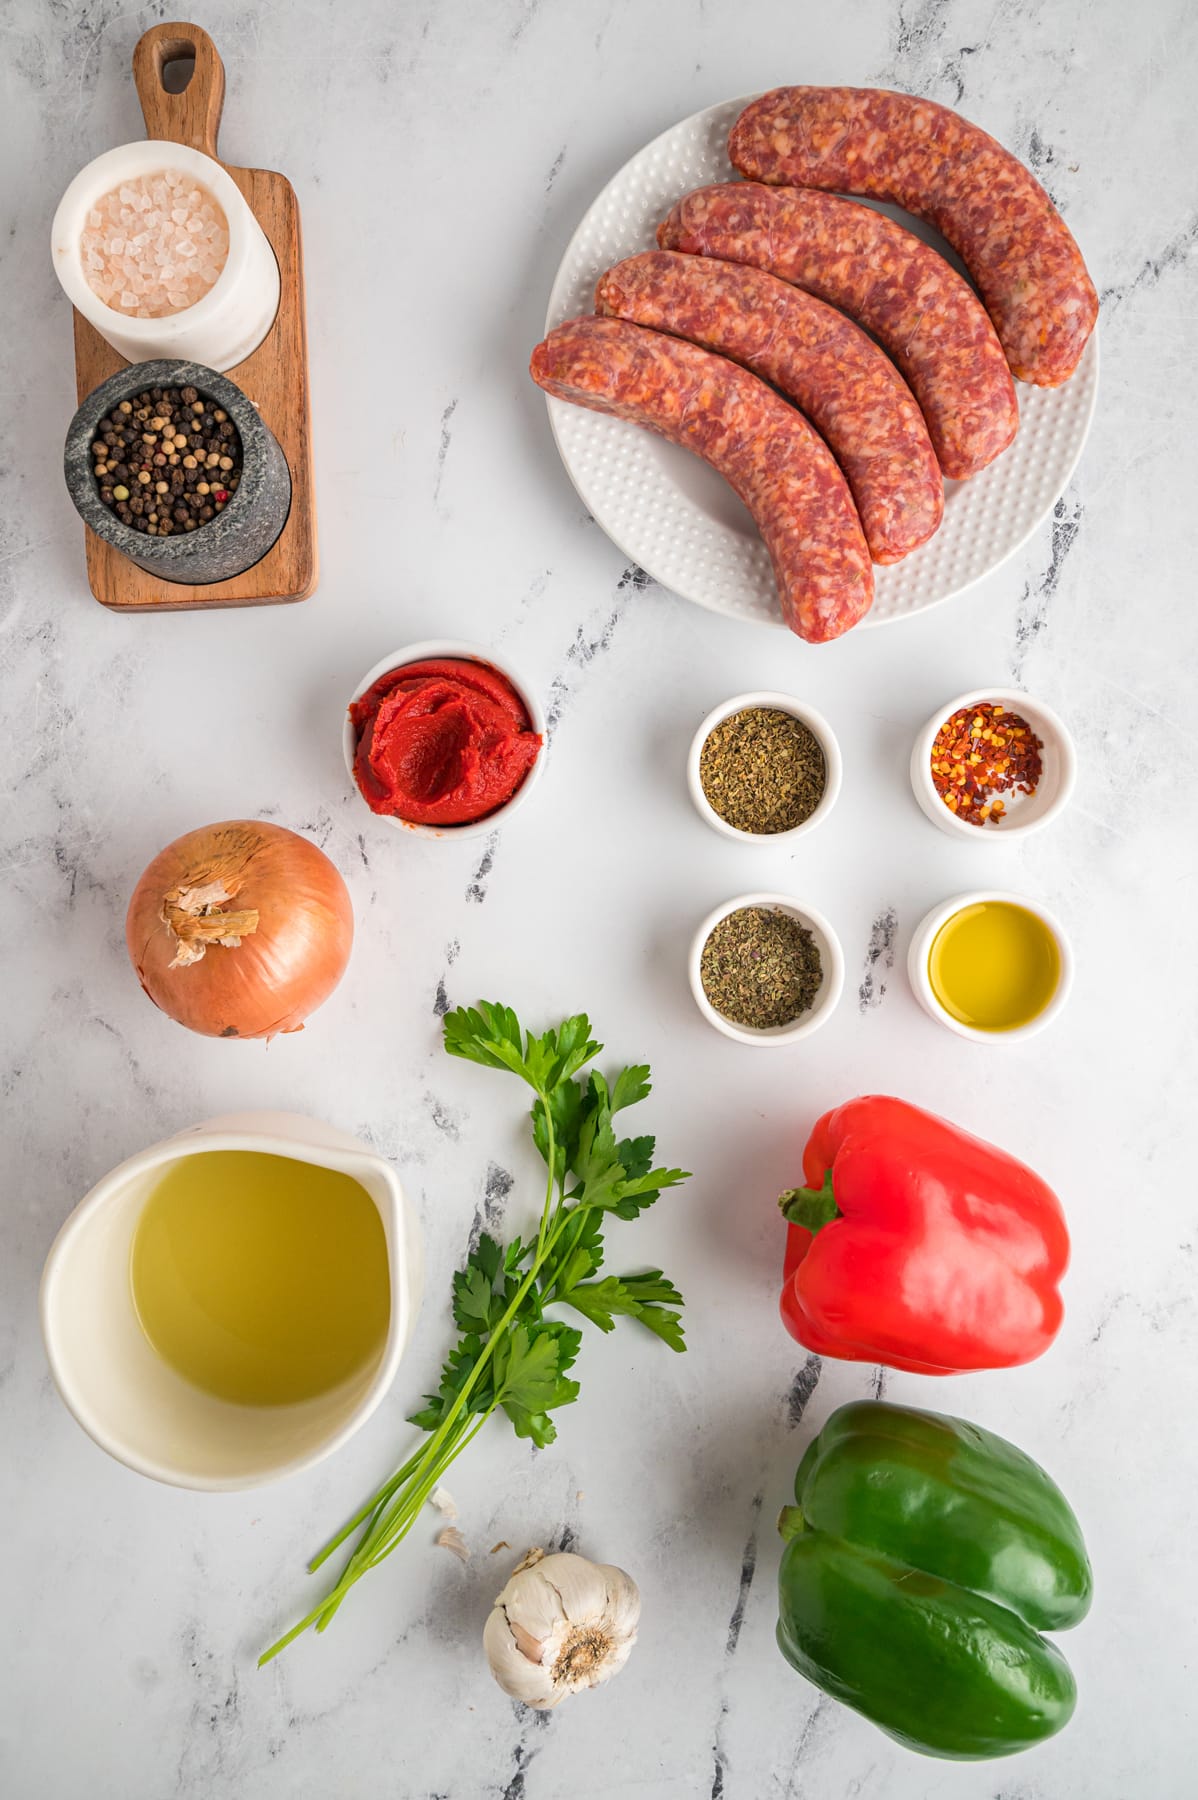 Overhead view of sausage and peppers ingredients